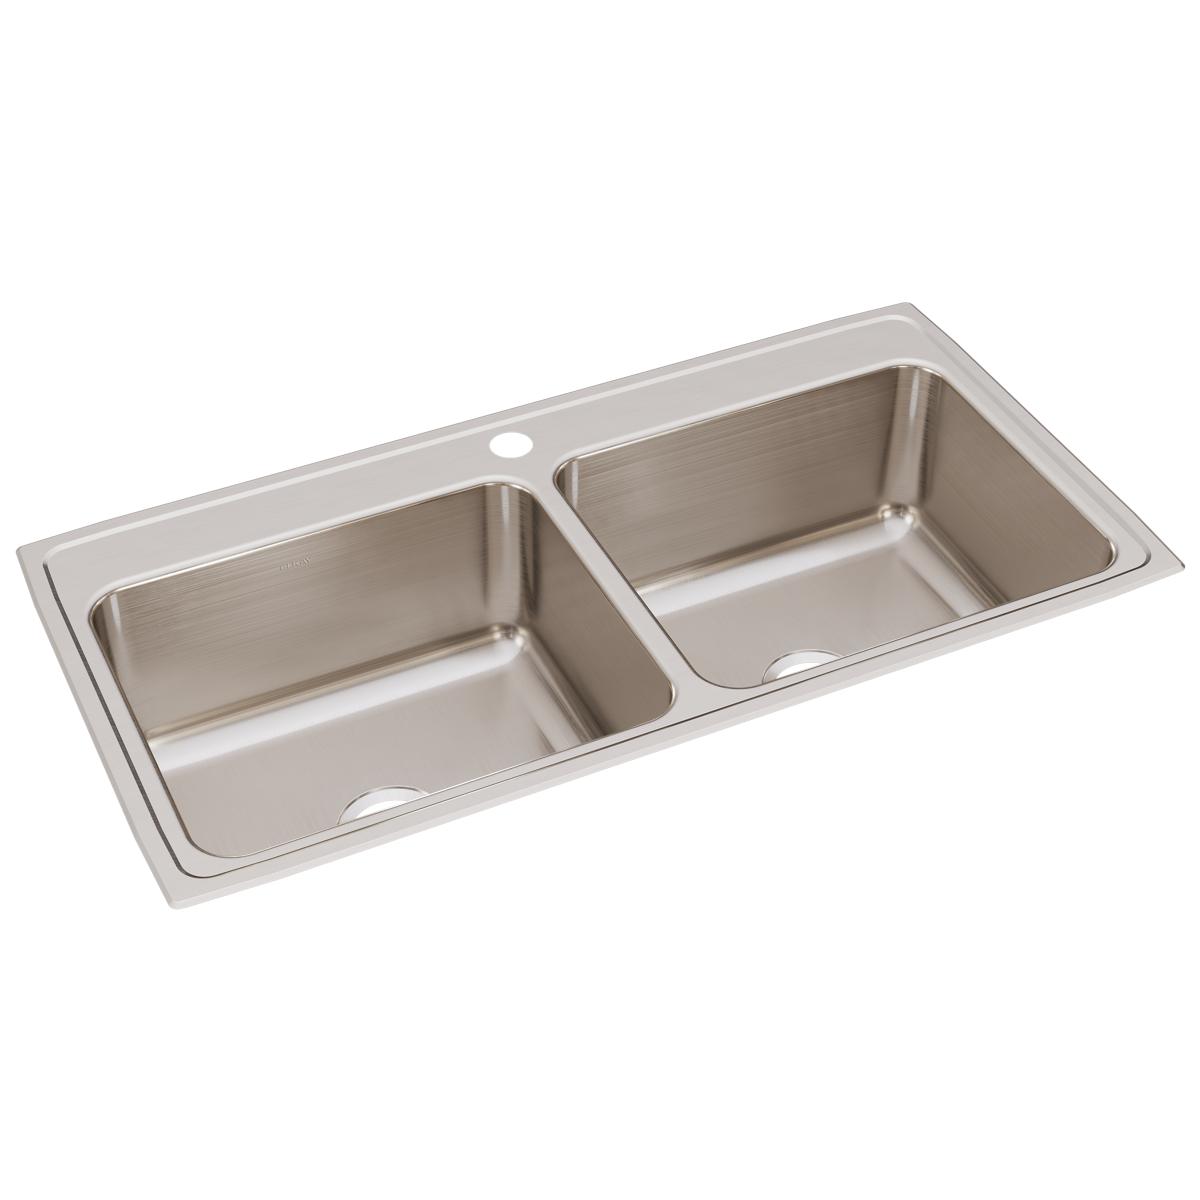 Elkay Lustertone Classic 43" x 22" x 10-1/8" Equal Double Bowl Stainless Steel Drop-in Sink